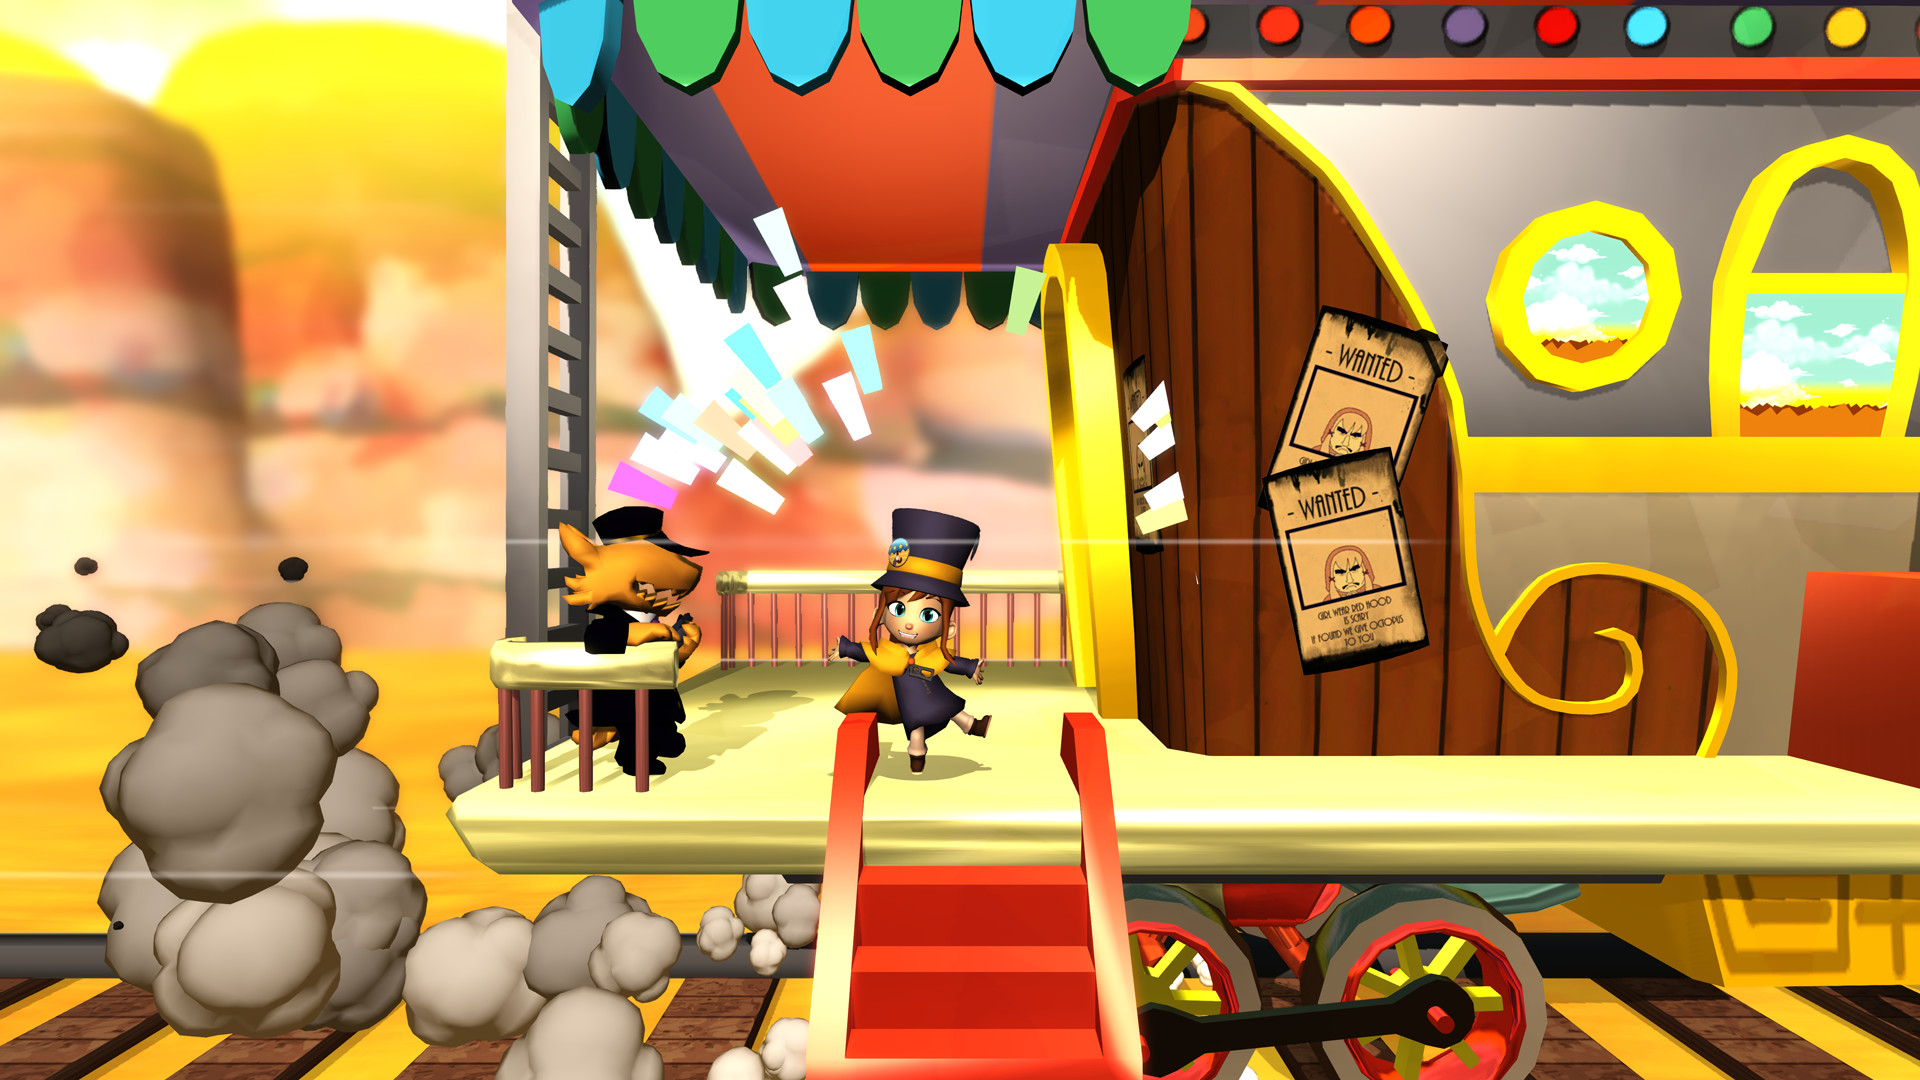 A Hat in Time 2? Paper-A Hat in Time? Gears for Breakfast is